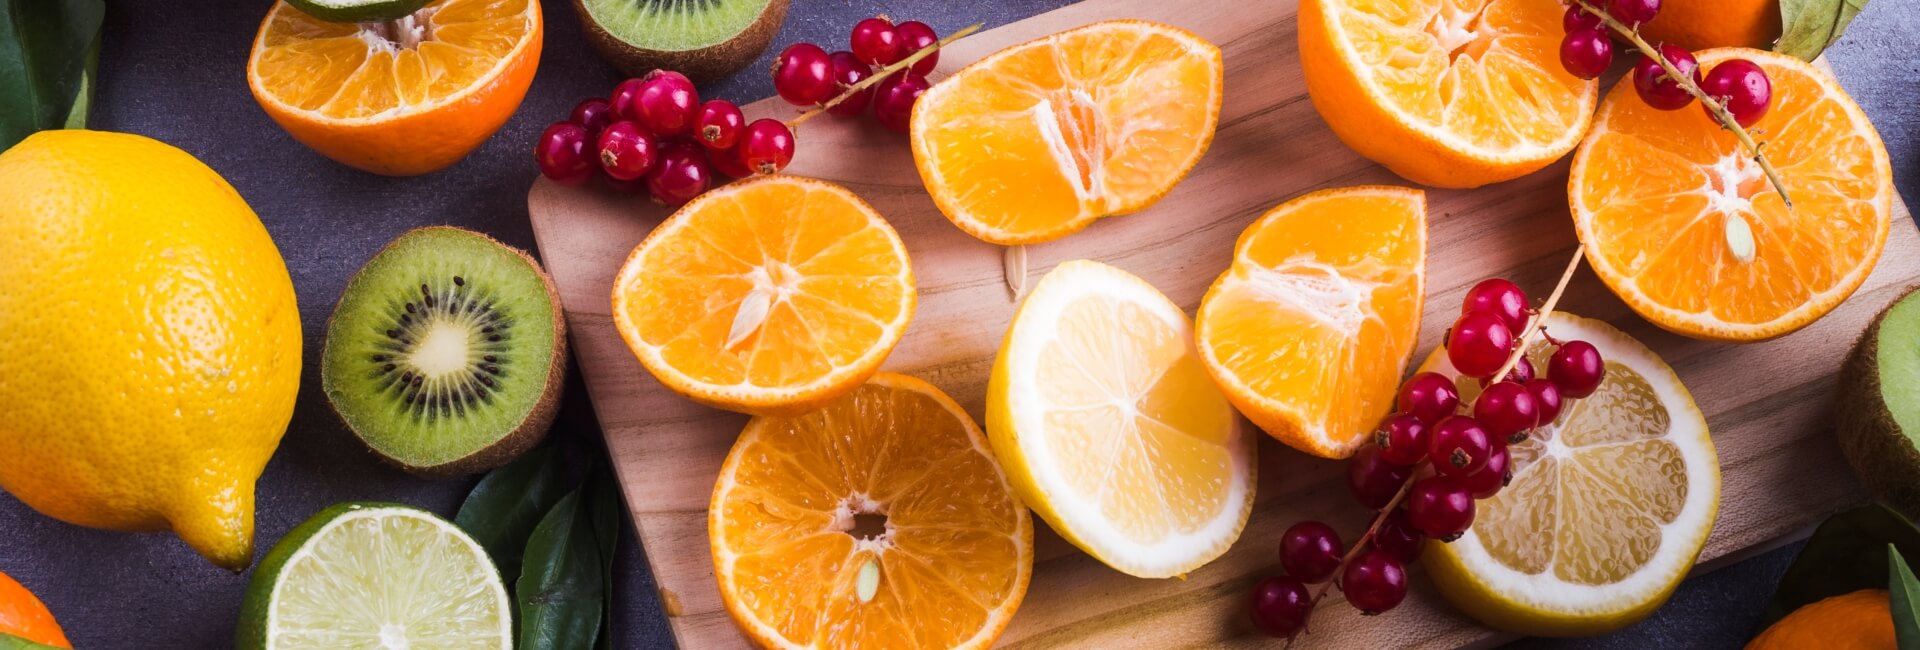 Vitamin C Benefits for Skin - the Importance of Anitoxidants in Your Skincare Routine